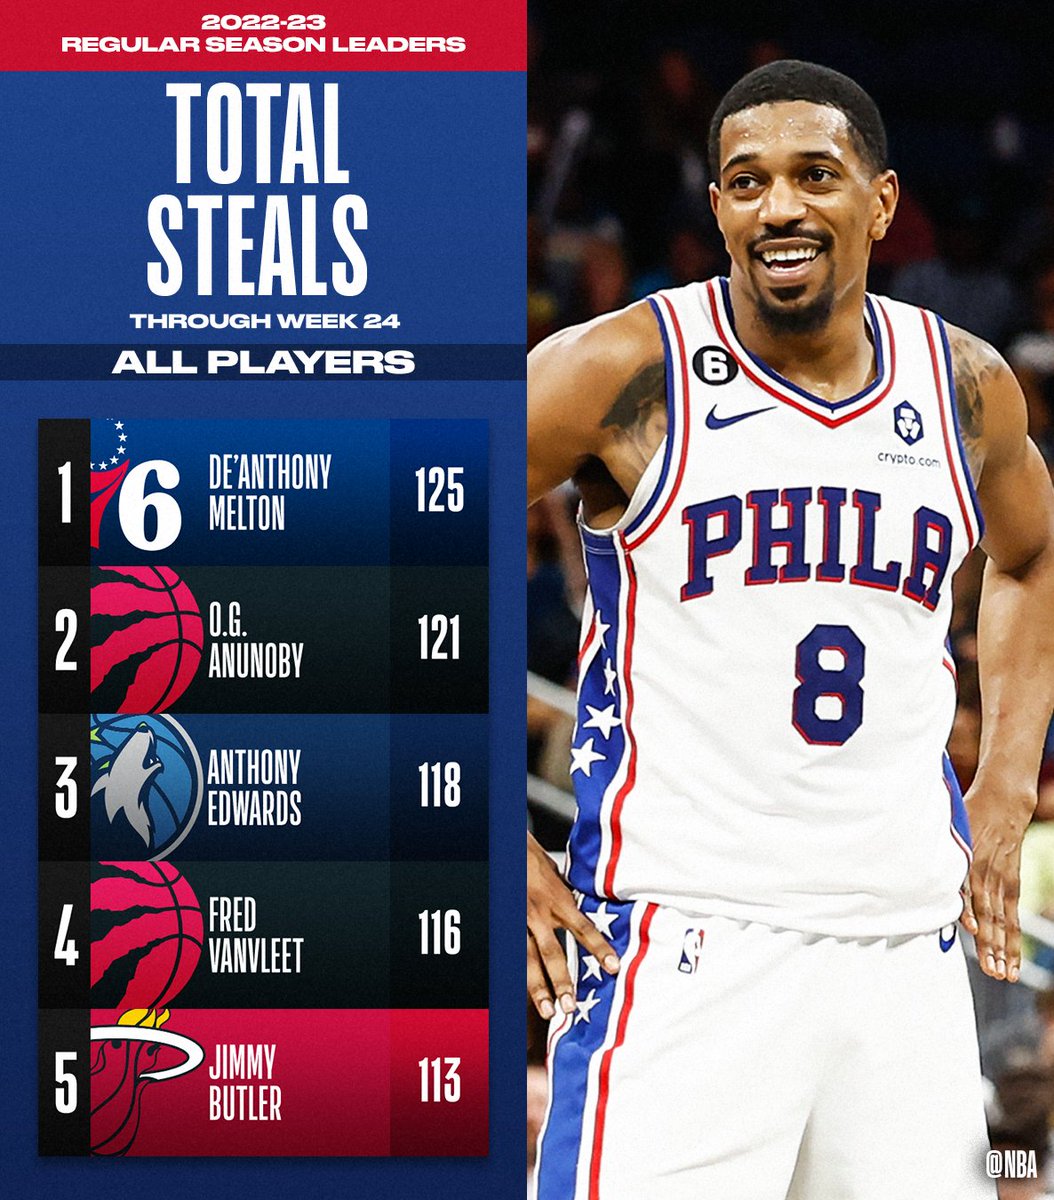 on Twitter "The TOTAL STEALS and STEALS PER GAME leaders